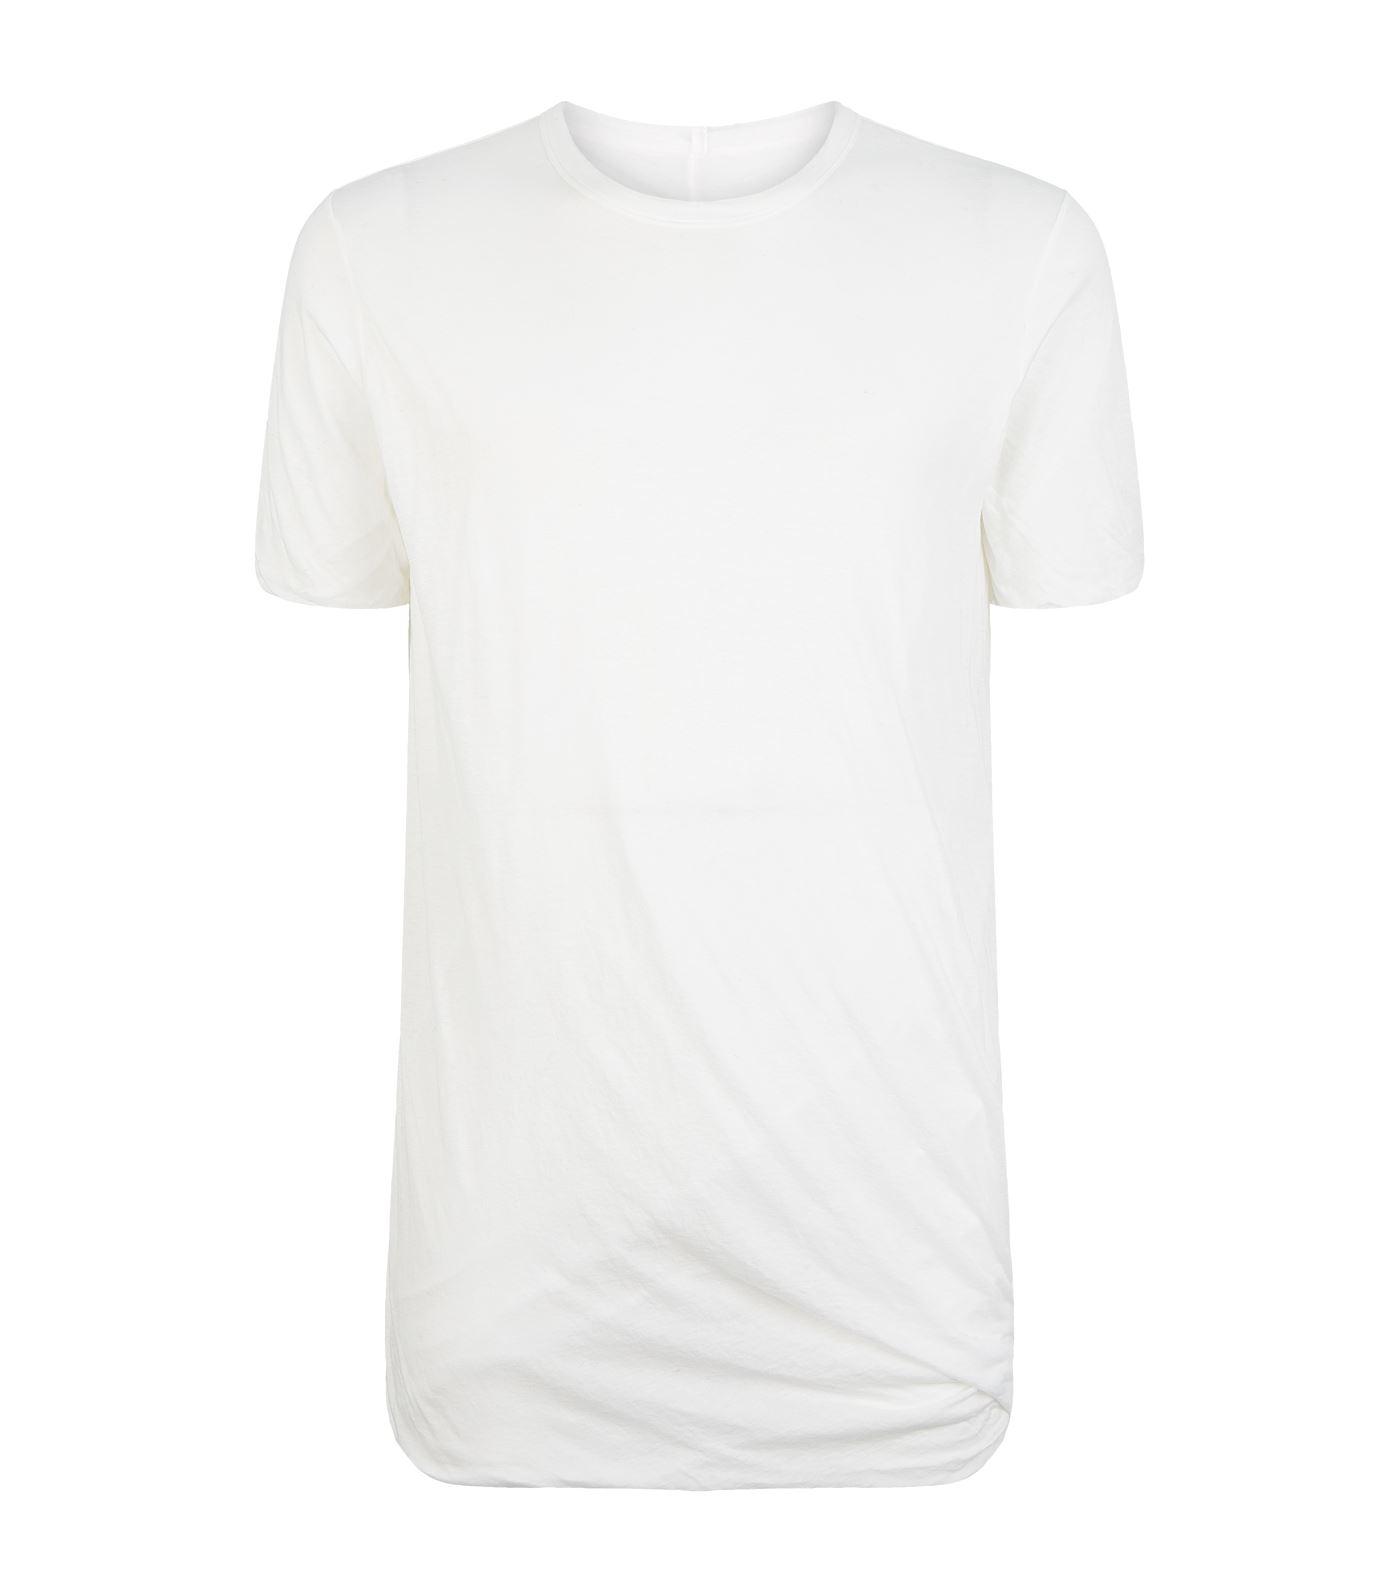 Rick Owens Double Layer T-shirt in White for Men - Lyst